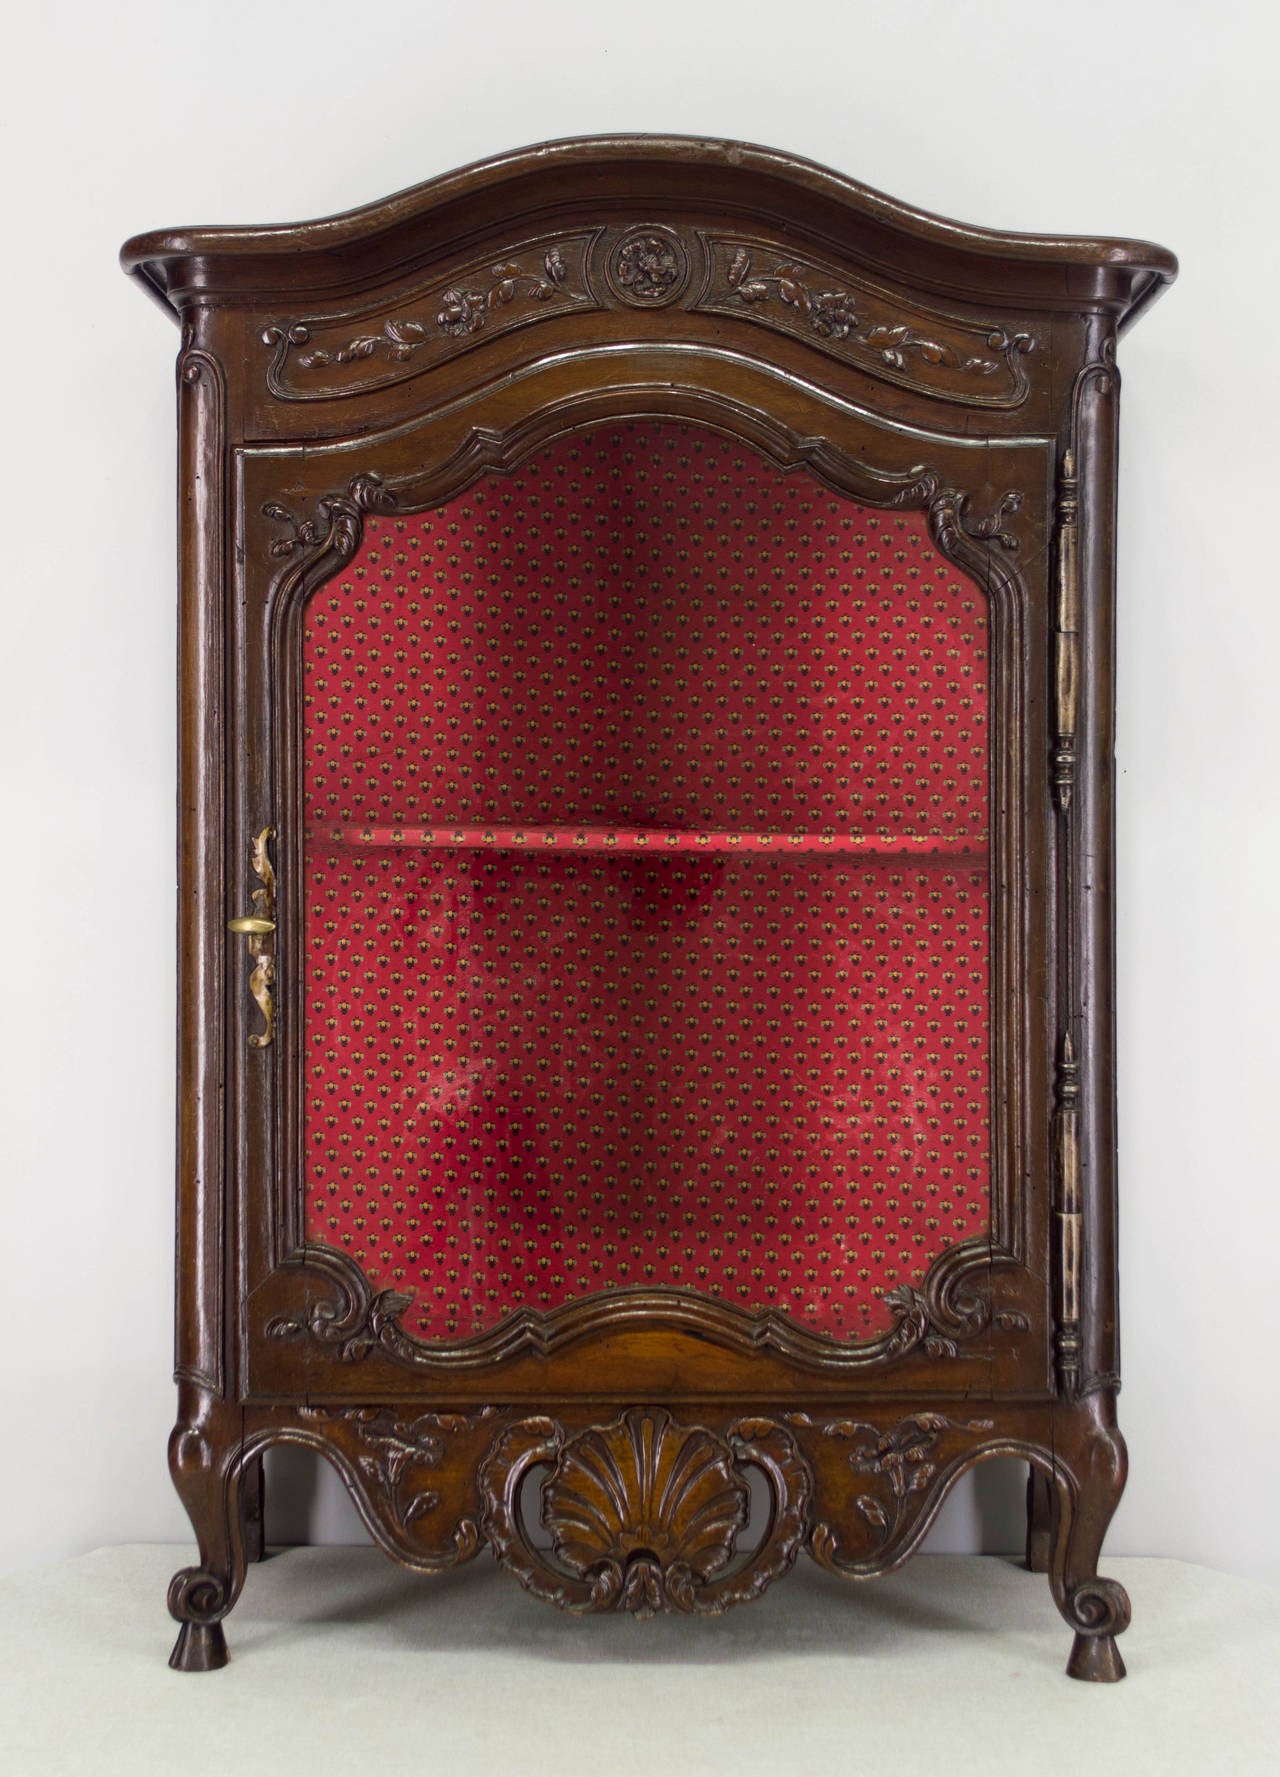 French 19th Century Louis XV Style Provençal Verrio or Display Cabinet